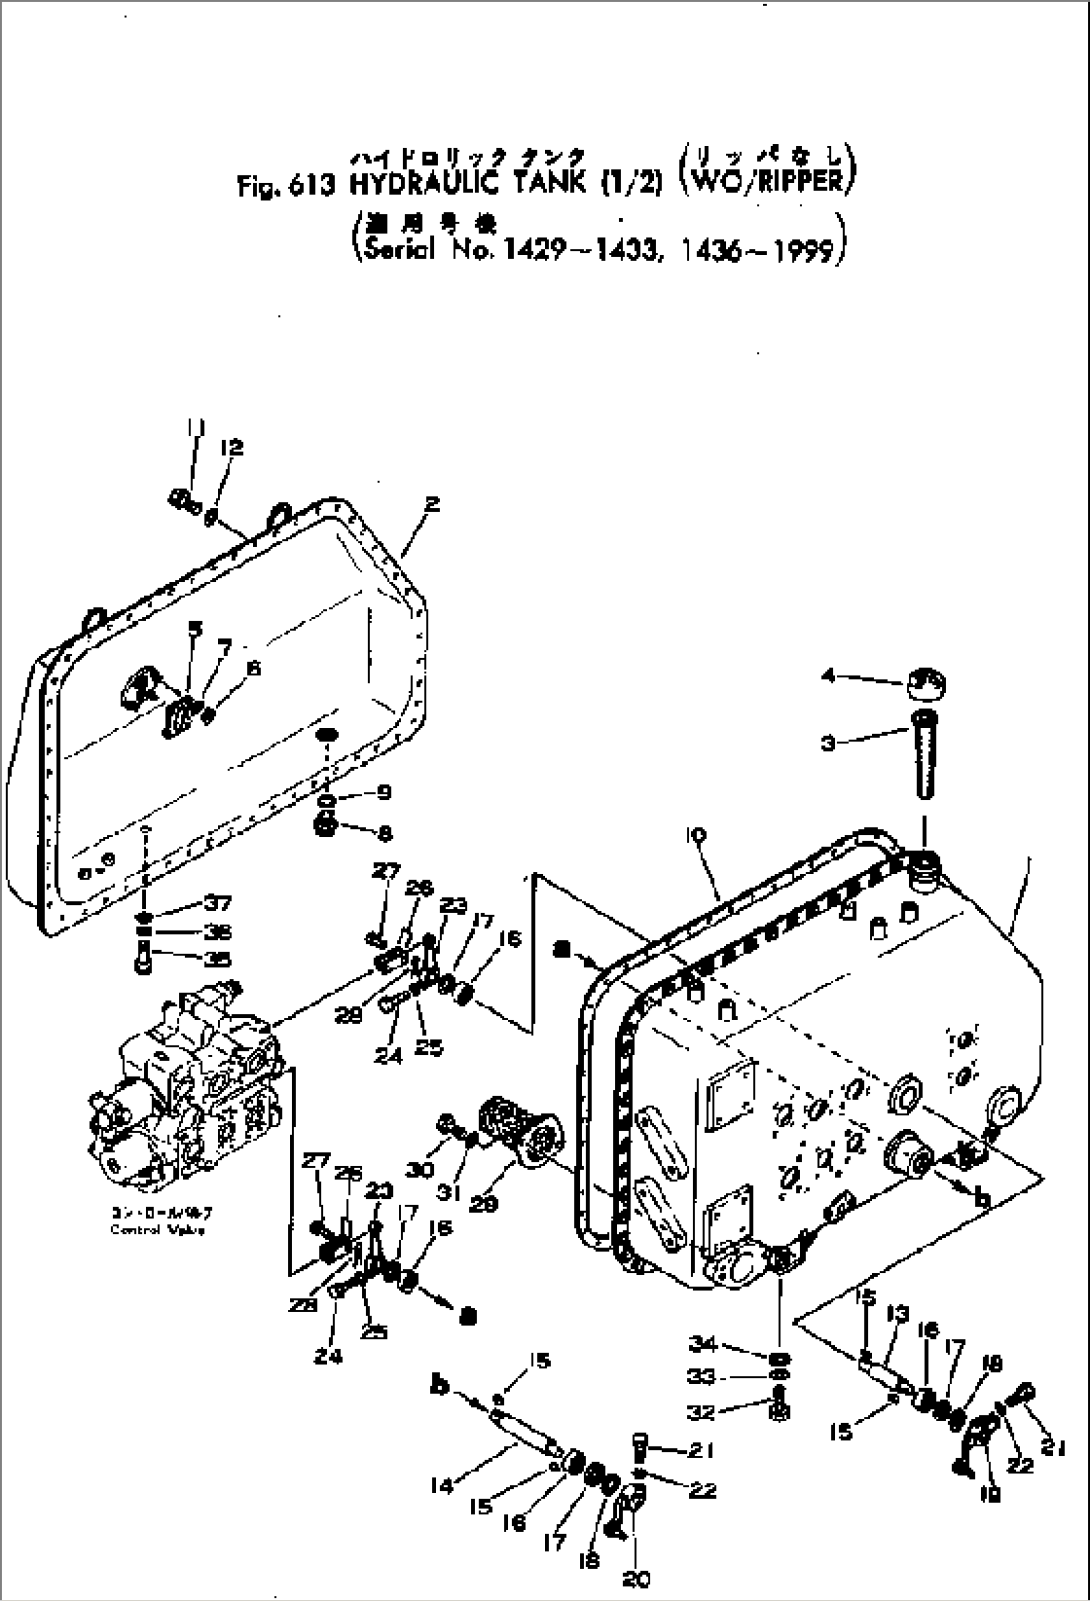 HYDRAULIC TANK (1/2) WITHOUT RIPPER(#1429-)